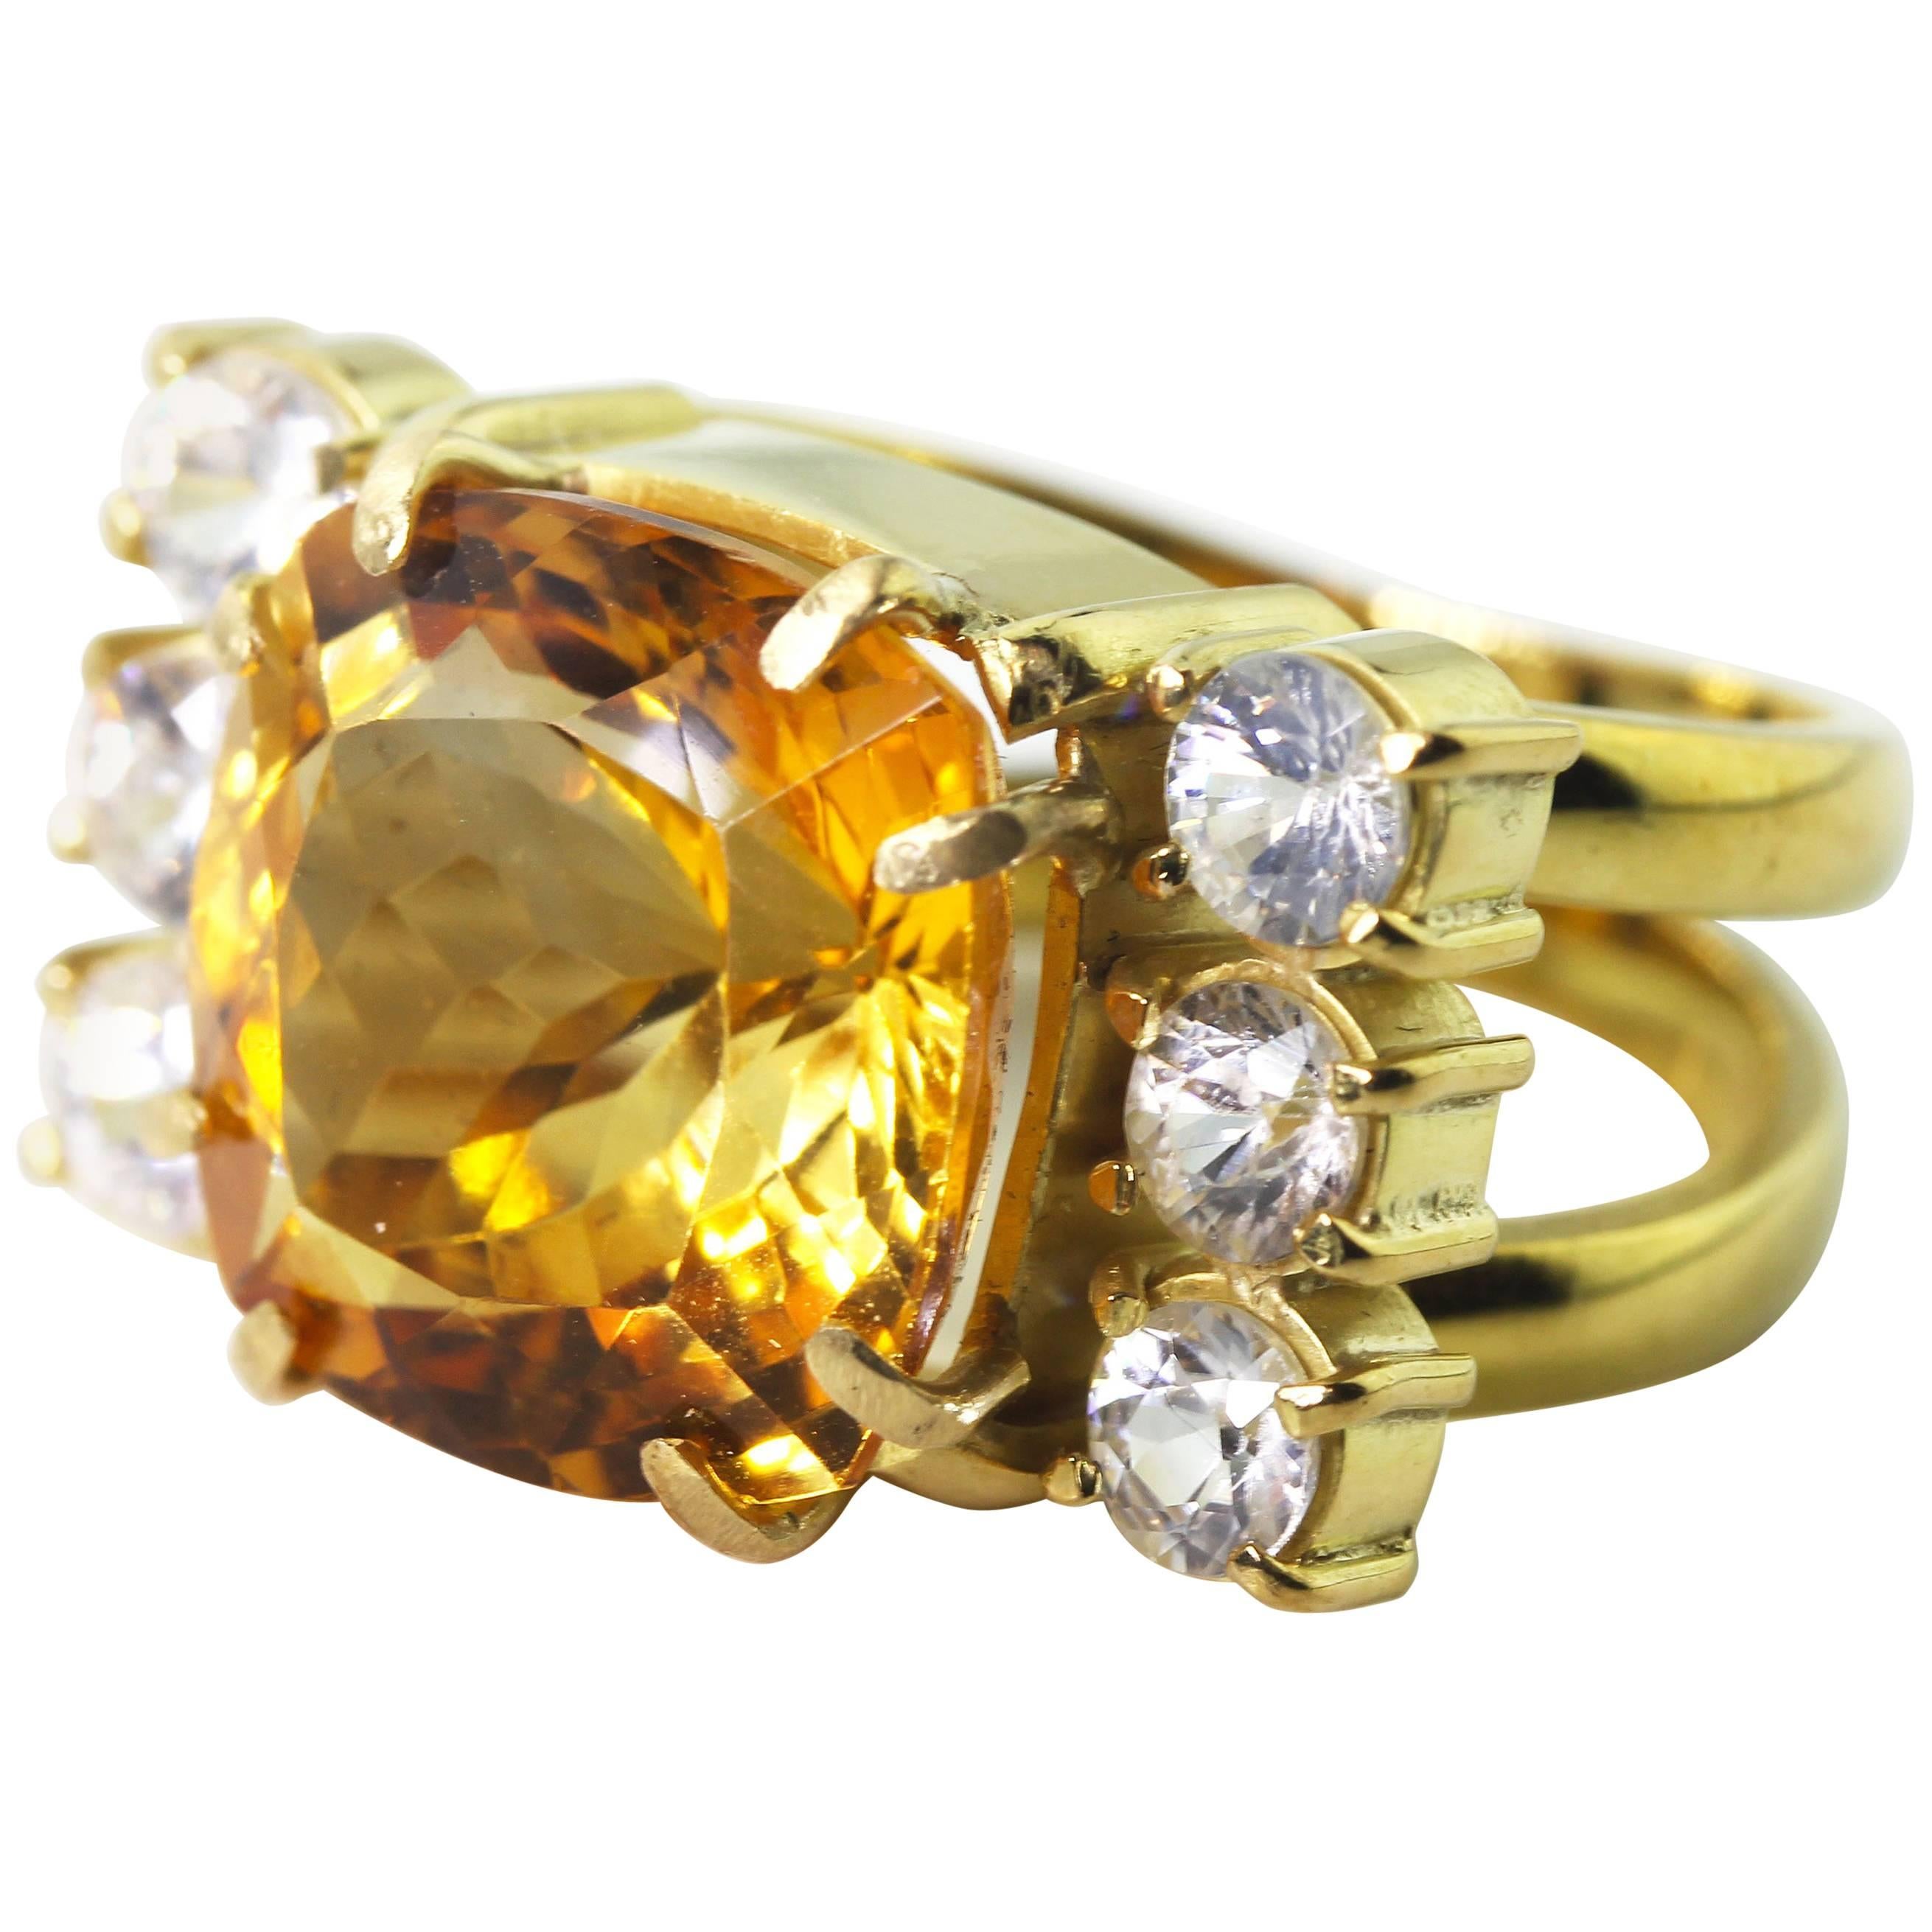 AJD Very Hollywood 11.5 Carat Golden Citrine & Sapphire 18Kt Gold Cocktail Ring For Sale